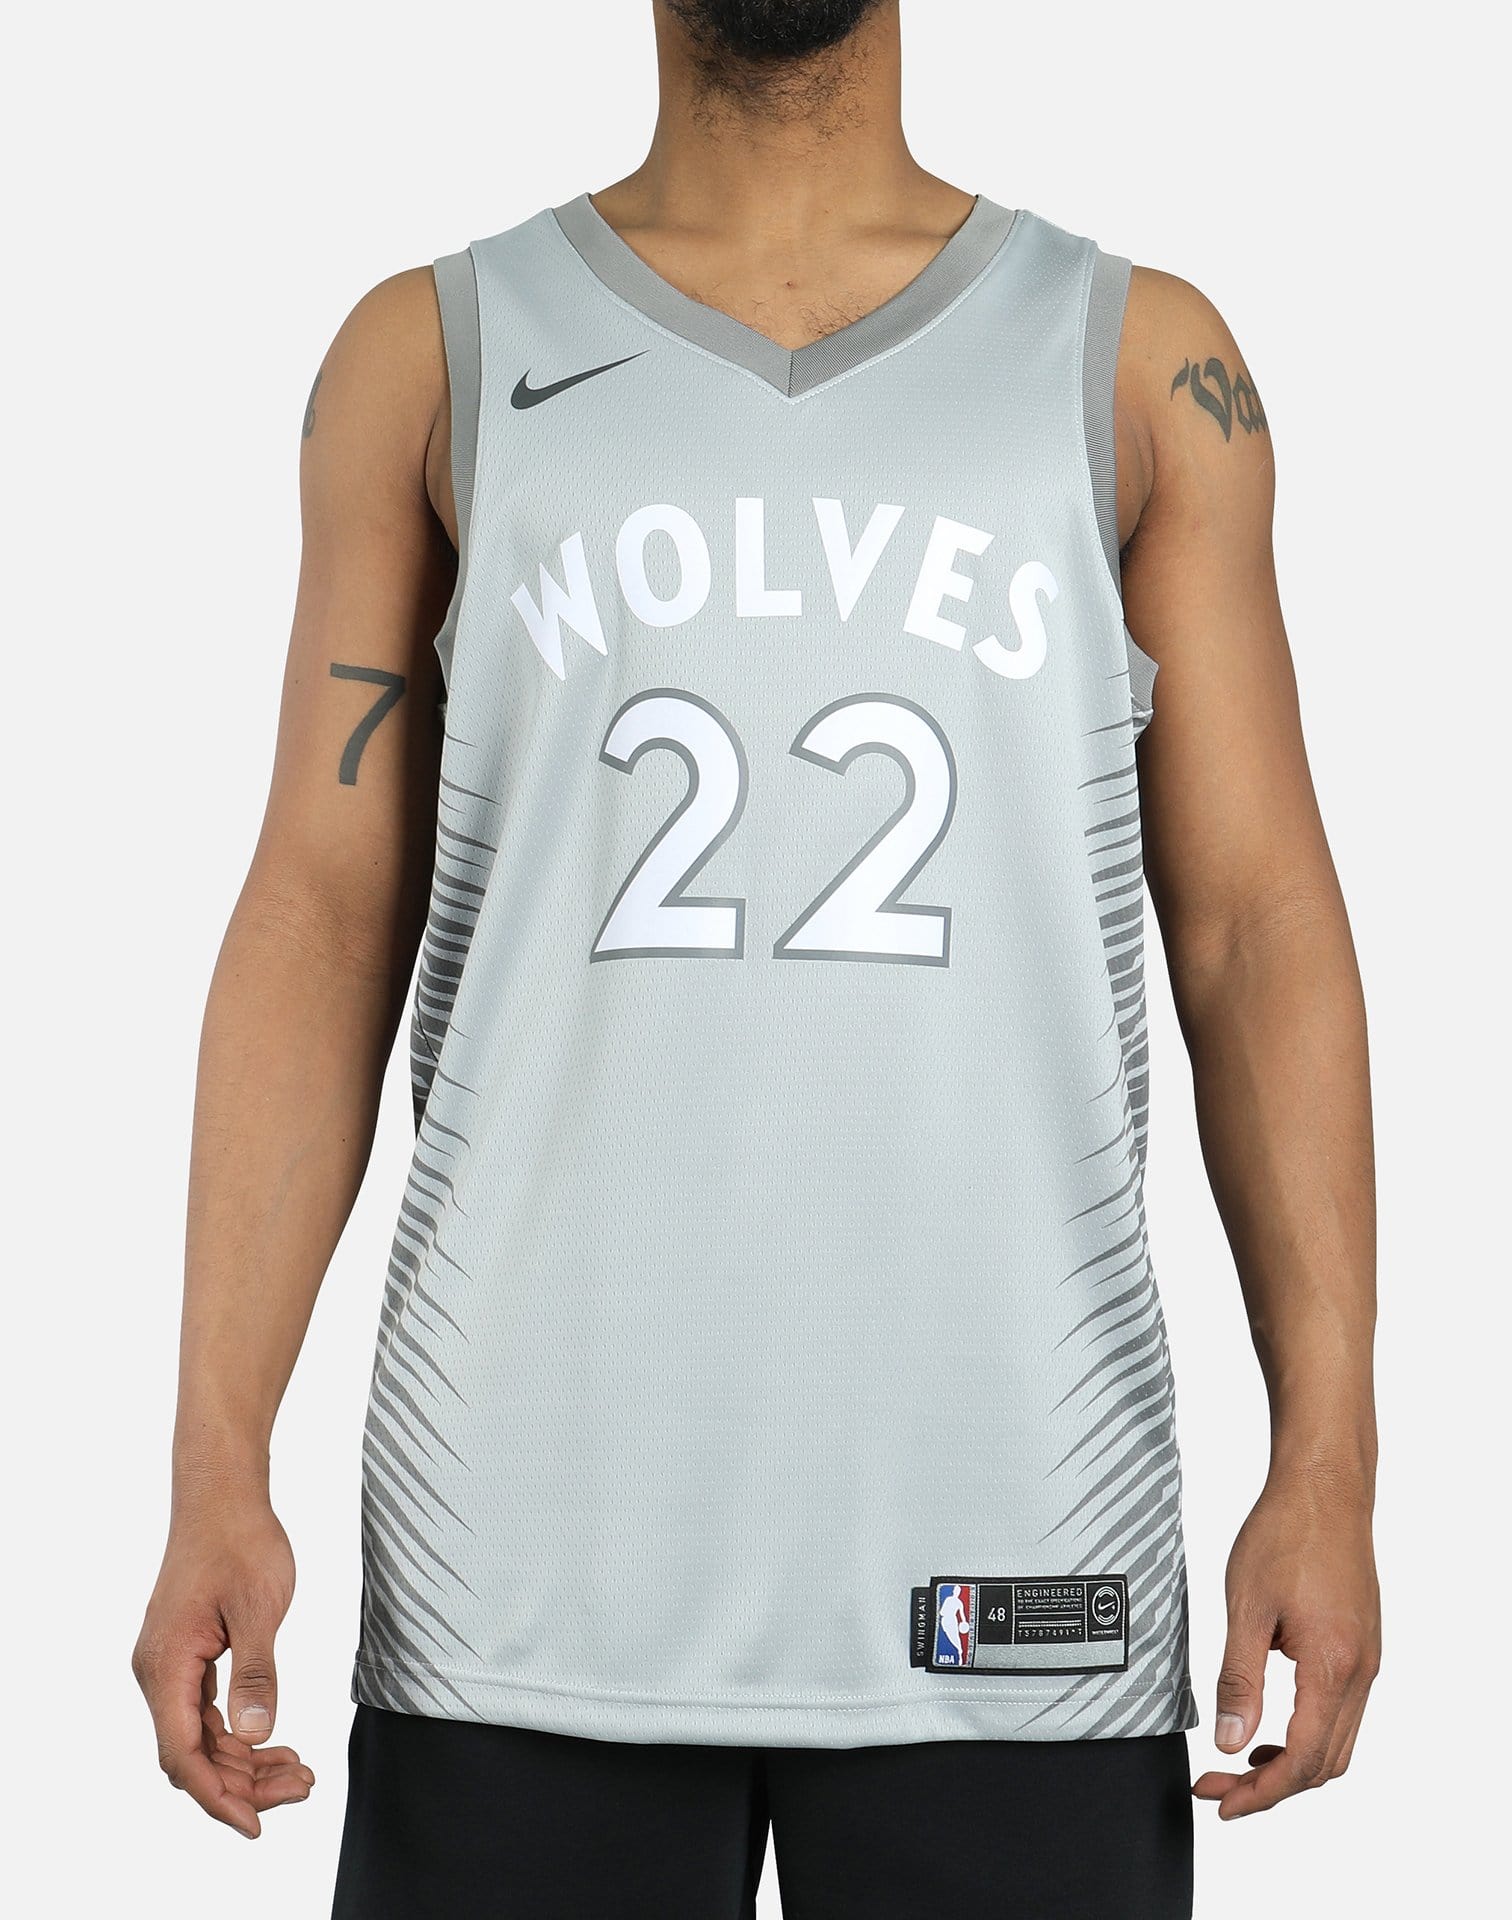 Order your new Minnesota Timberwolves City Edition gear now